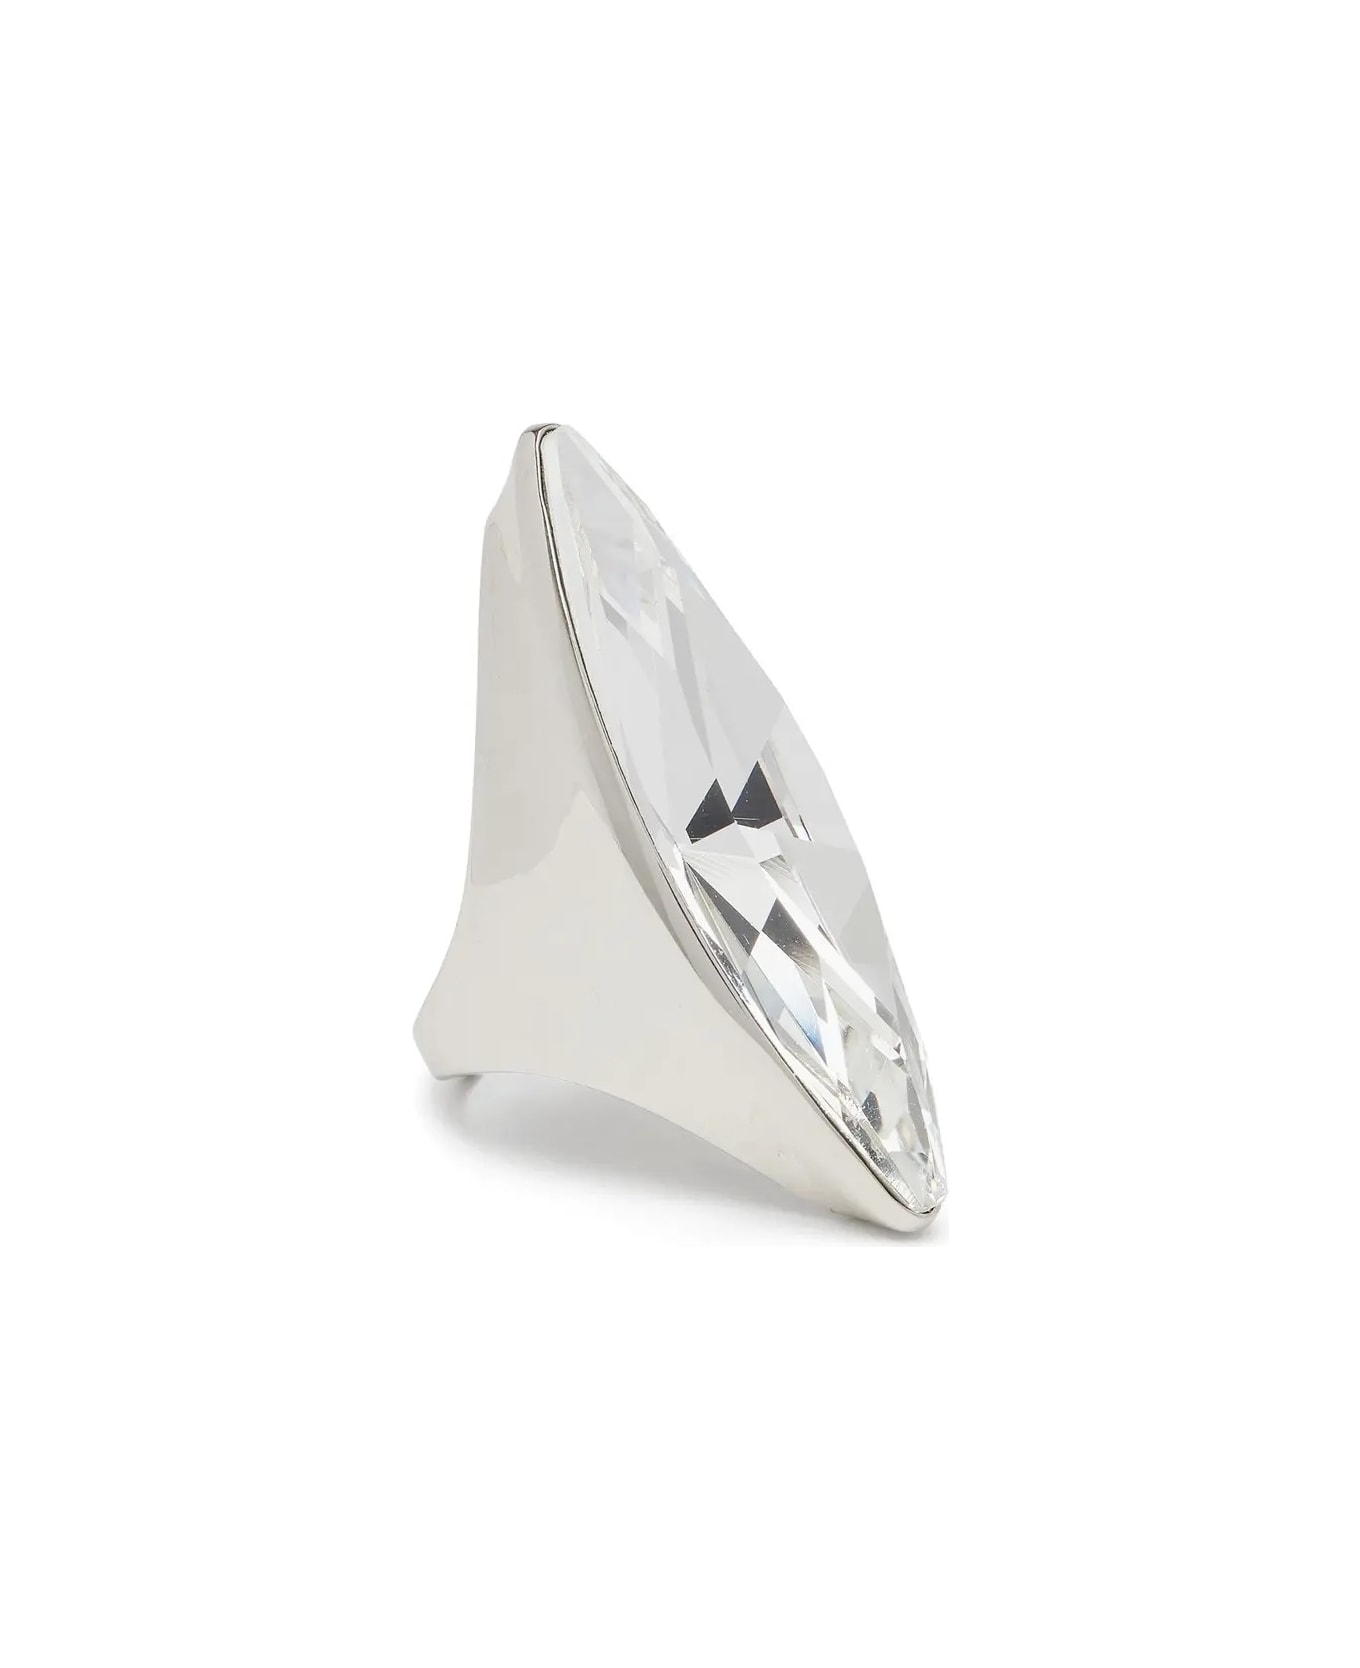 Alexander McQueen Antiqued Silver Jewelled Pointed Ring - Silver